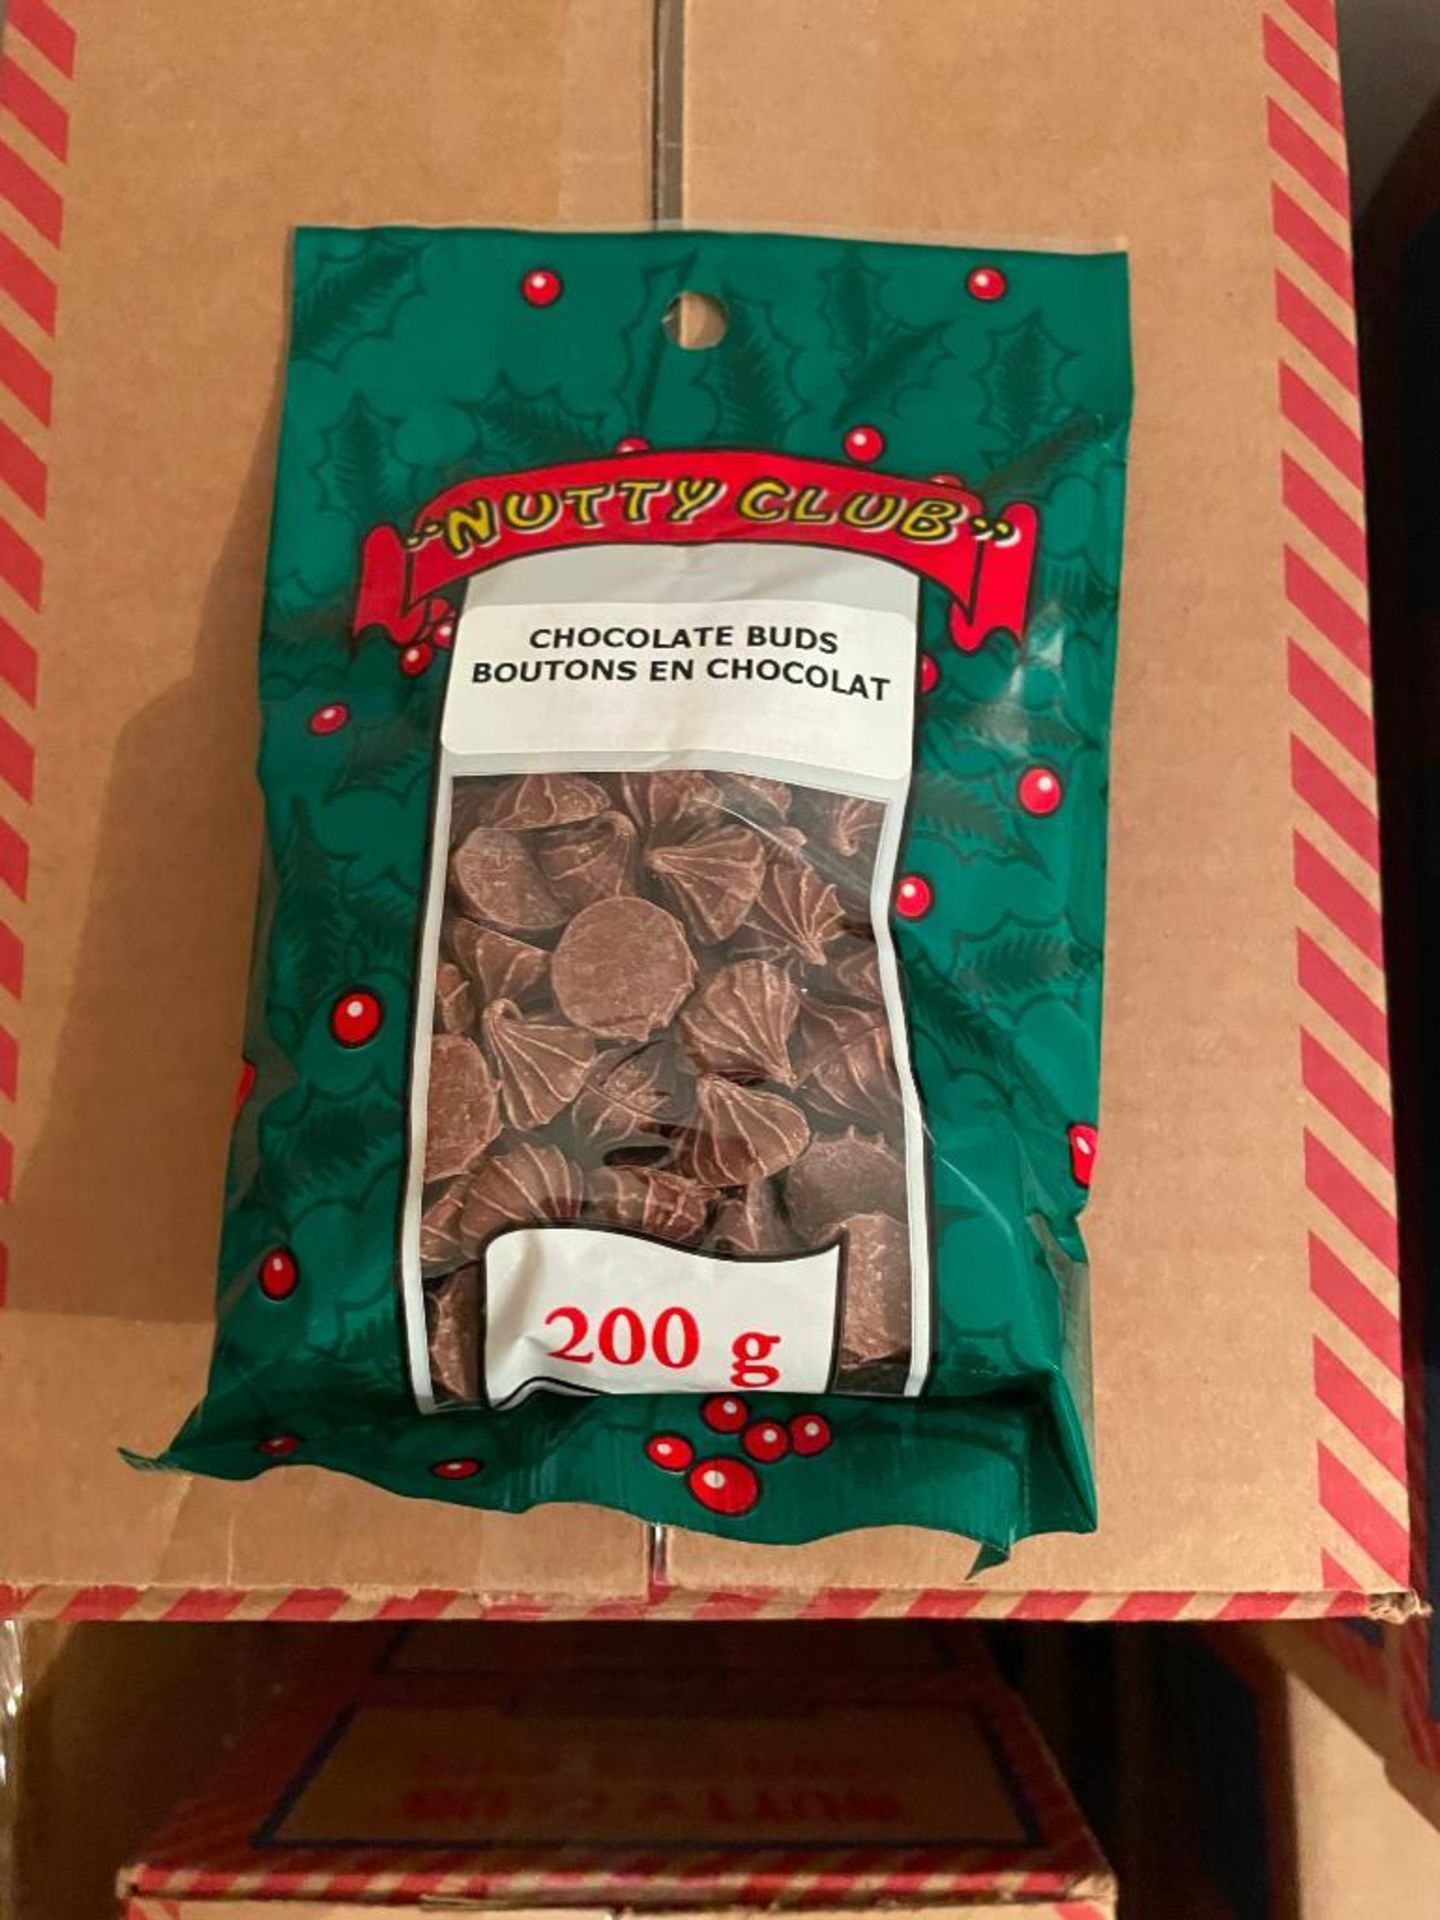 (6) BOXES OF NUTTY CLUB CHOCOLATE BUDS & (5) BOXES OF CHOCOLATE COATED NUTS & RAISINS, 12/200G BAGS - Image 3 of 5